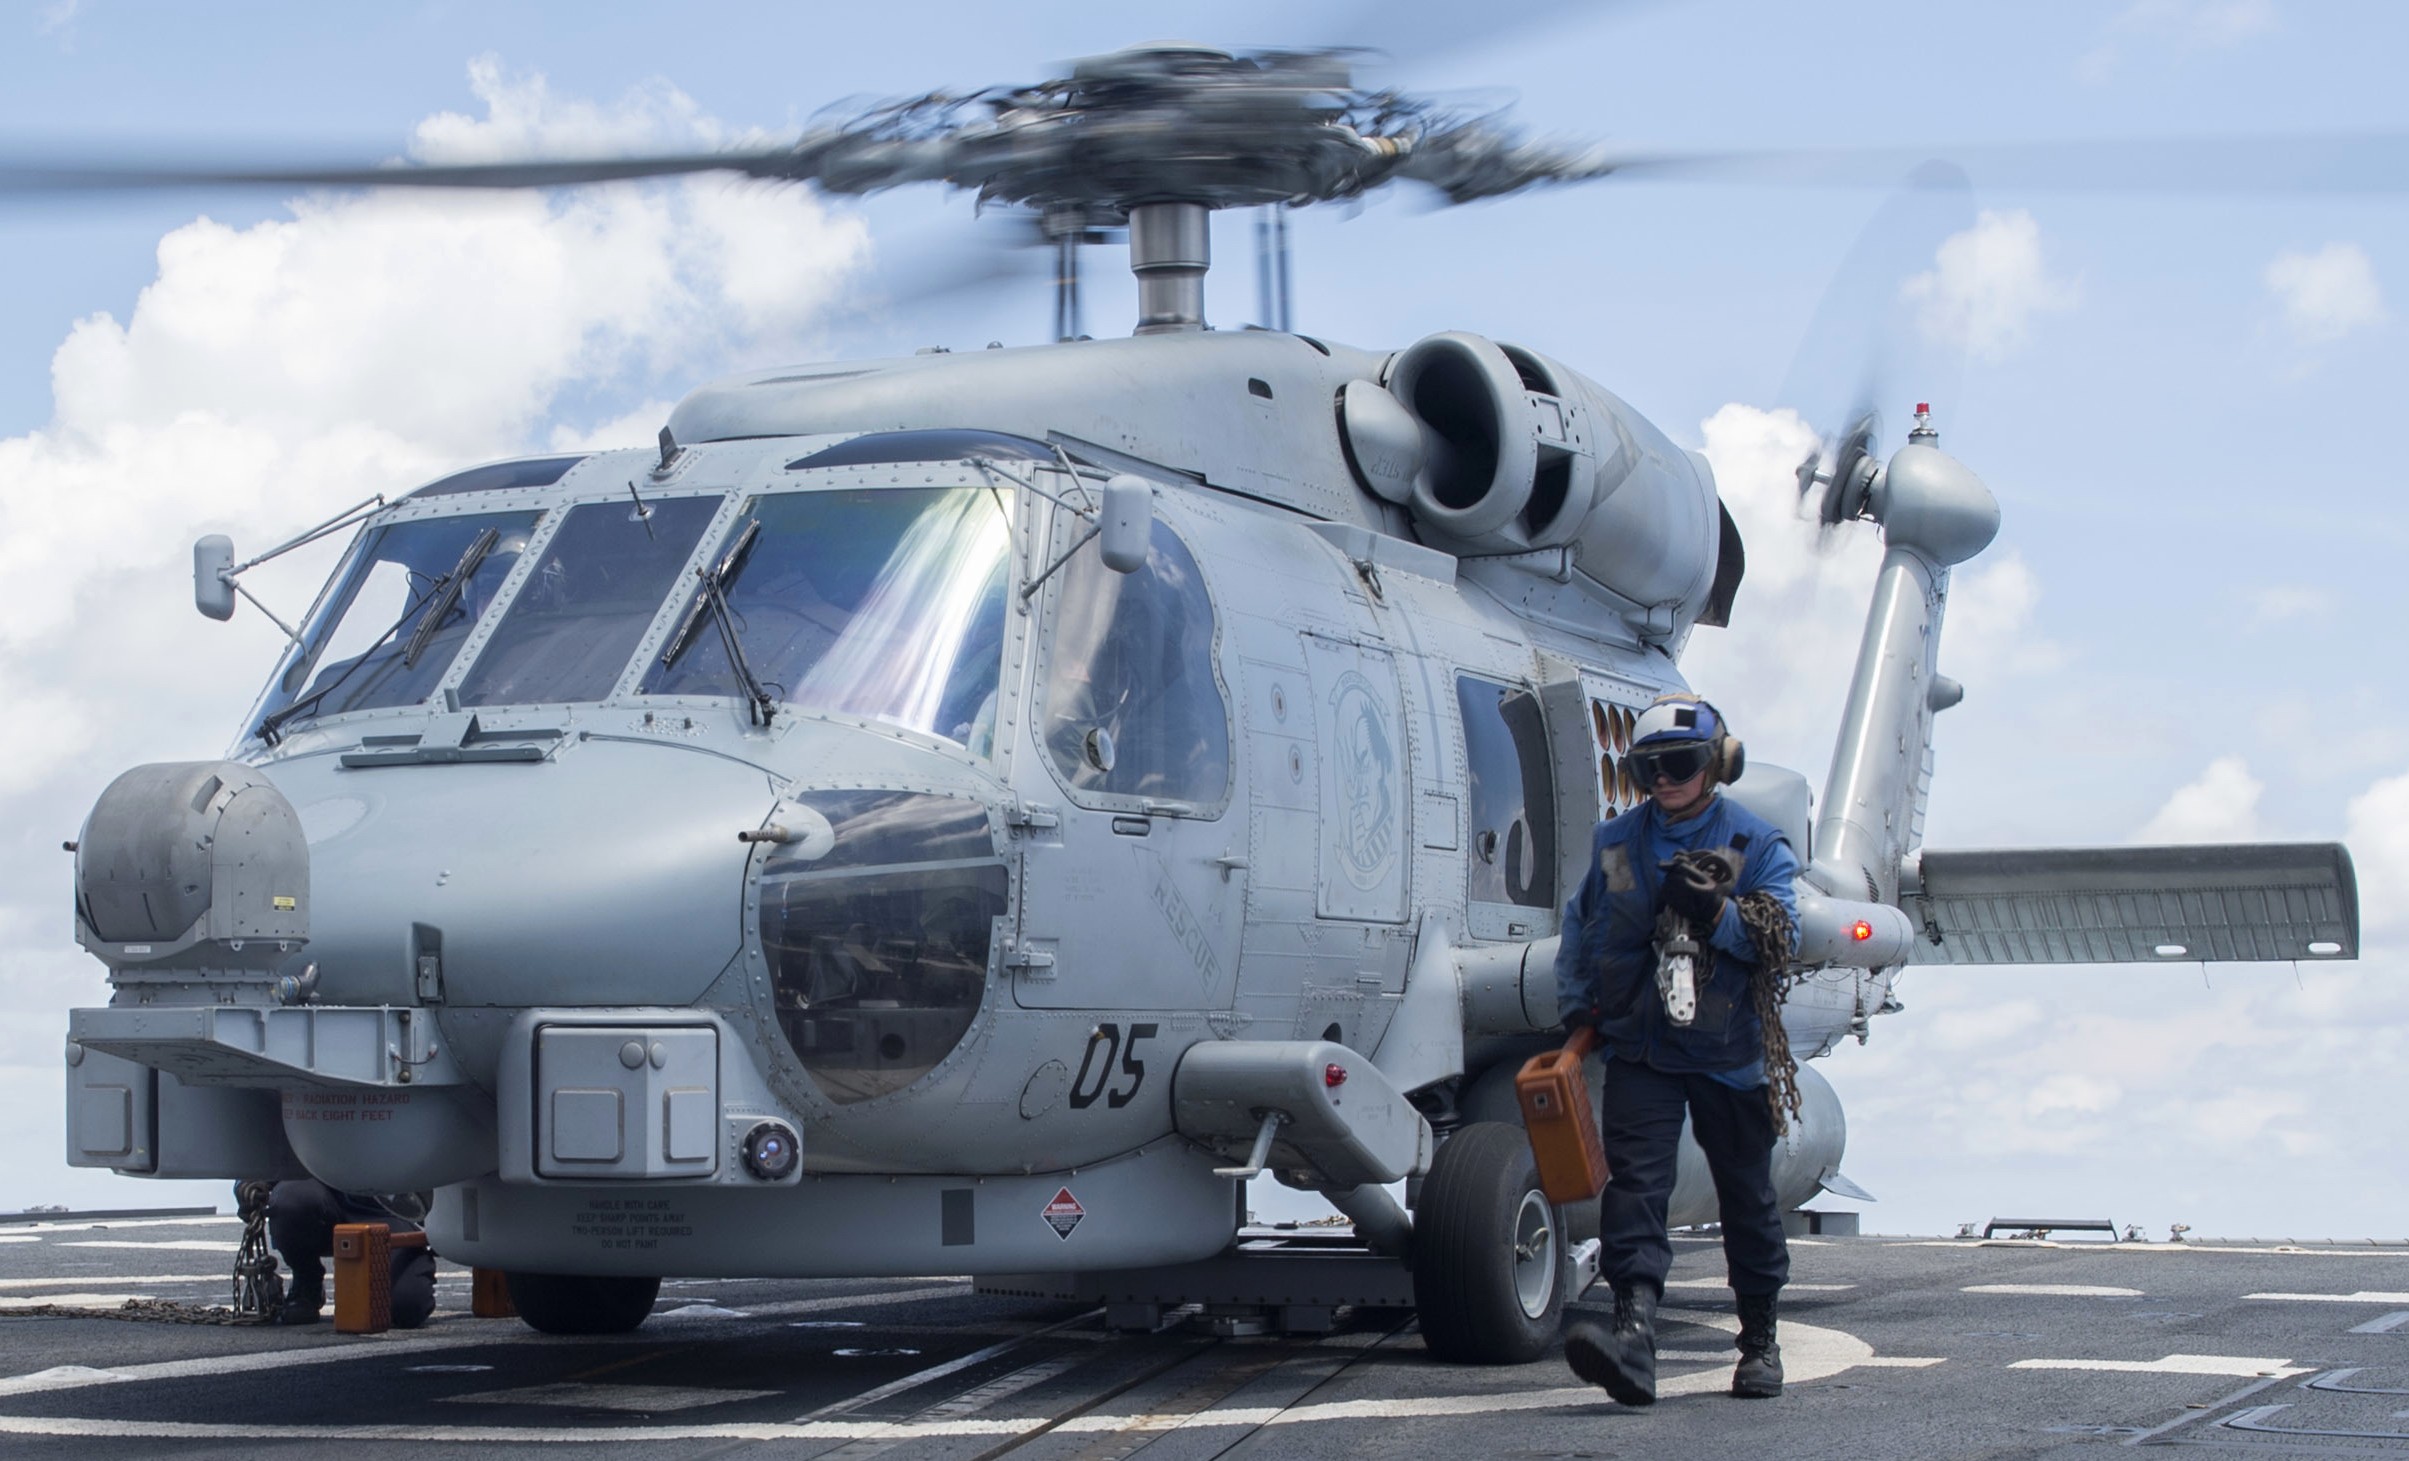 hsm-51 warlords helicopter maritime strike squadron mh-60r seahawk navy 2016 40